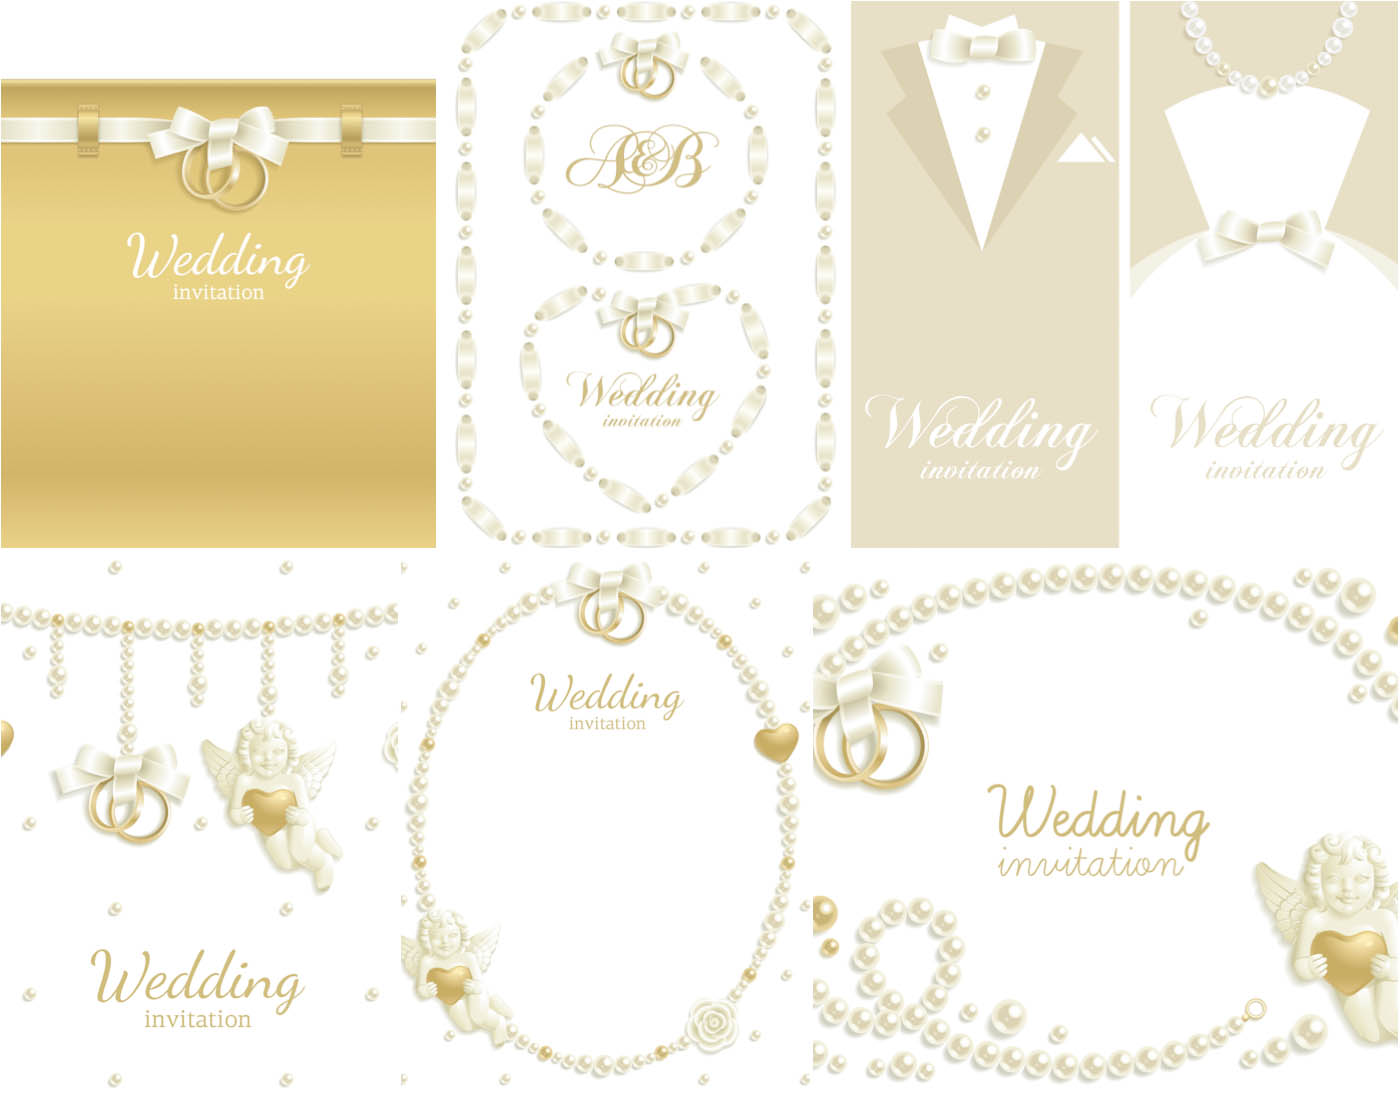 Vector wedding invitations with hearts, pearls and rings